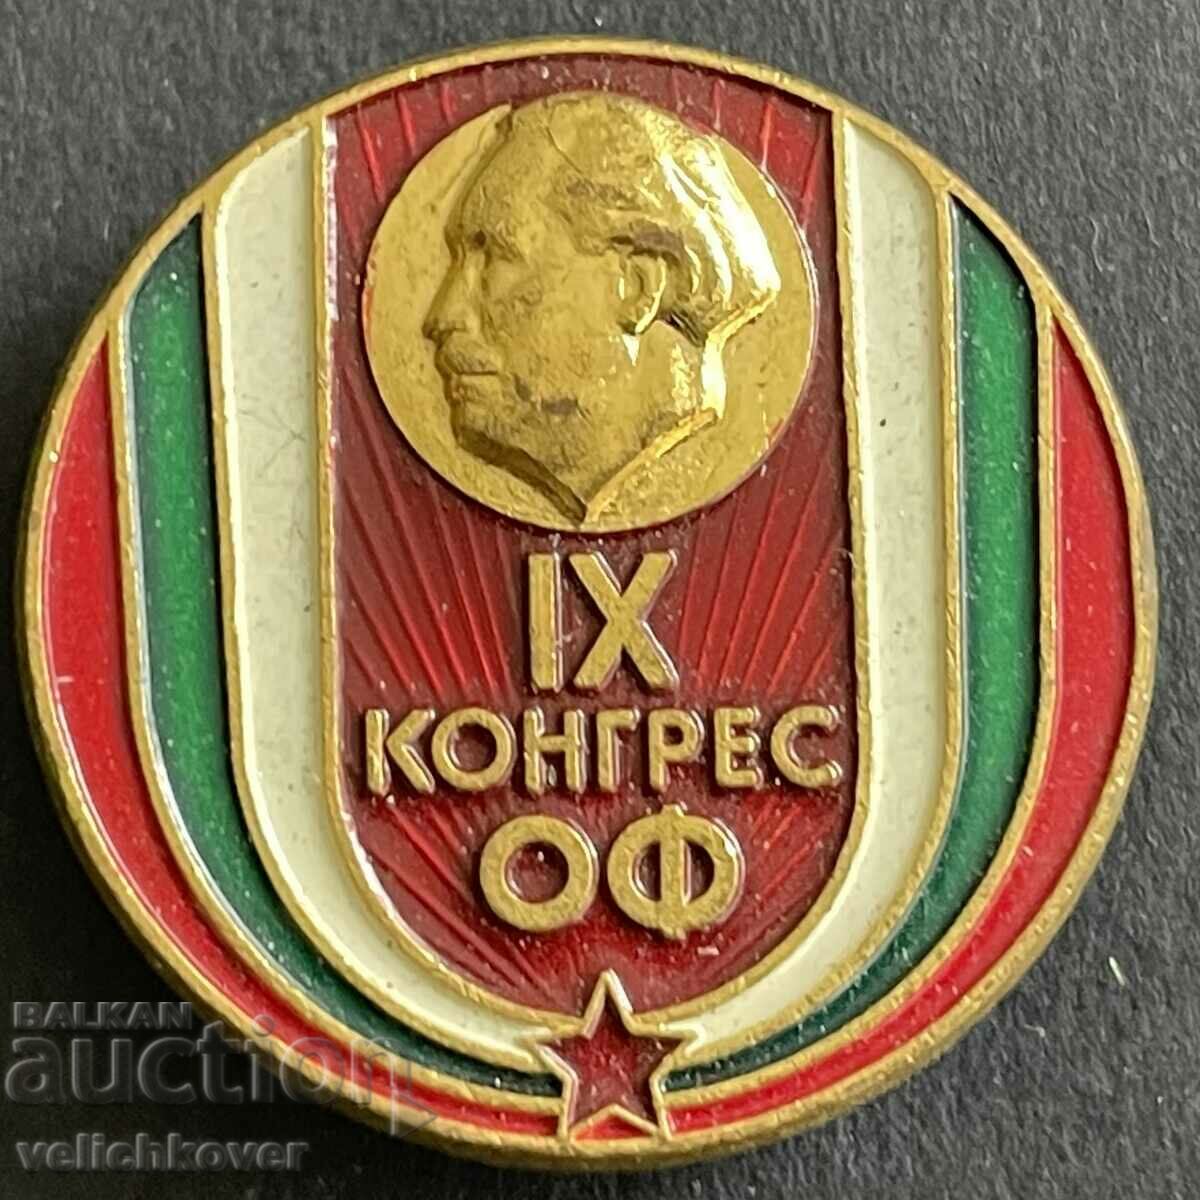 37524 Bulgaria sign 9th Congress of the Patriotic Front 1981